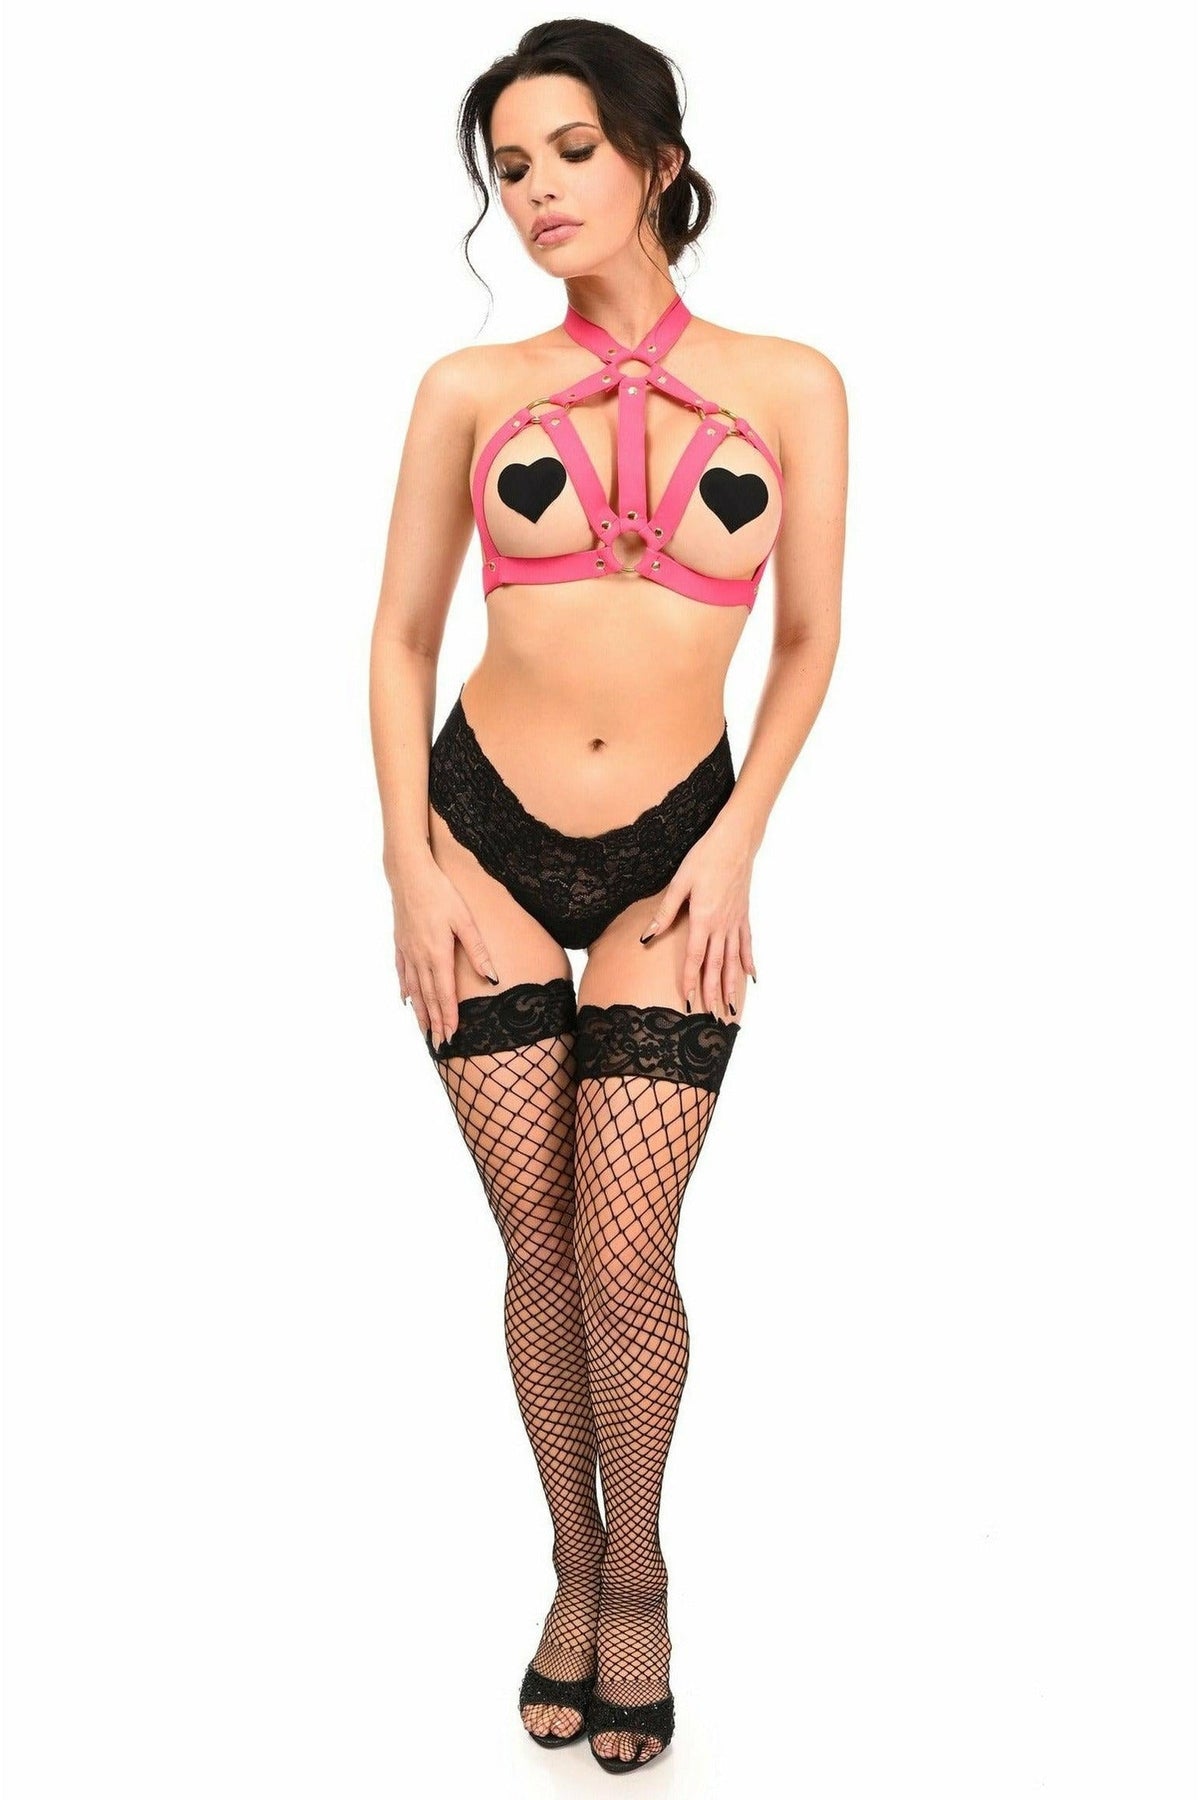 BOXED Hot Pink Stretchy Body Harness w/Gold Hardware-Daisy Corsets